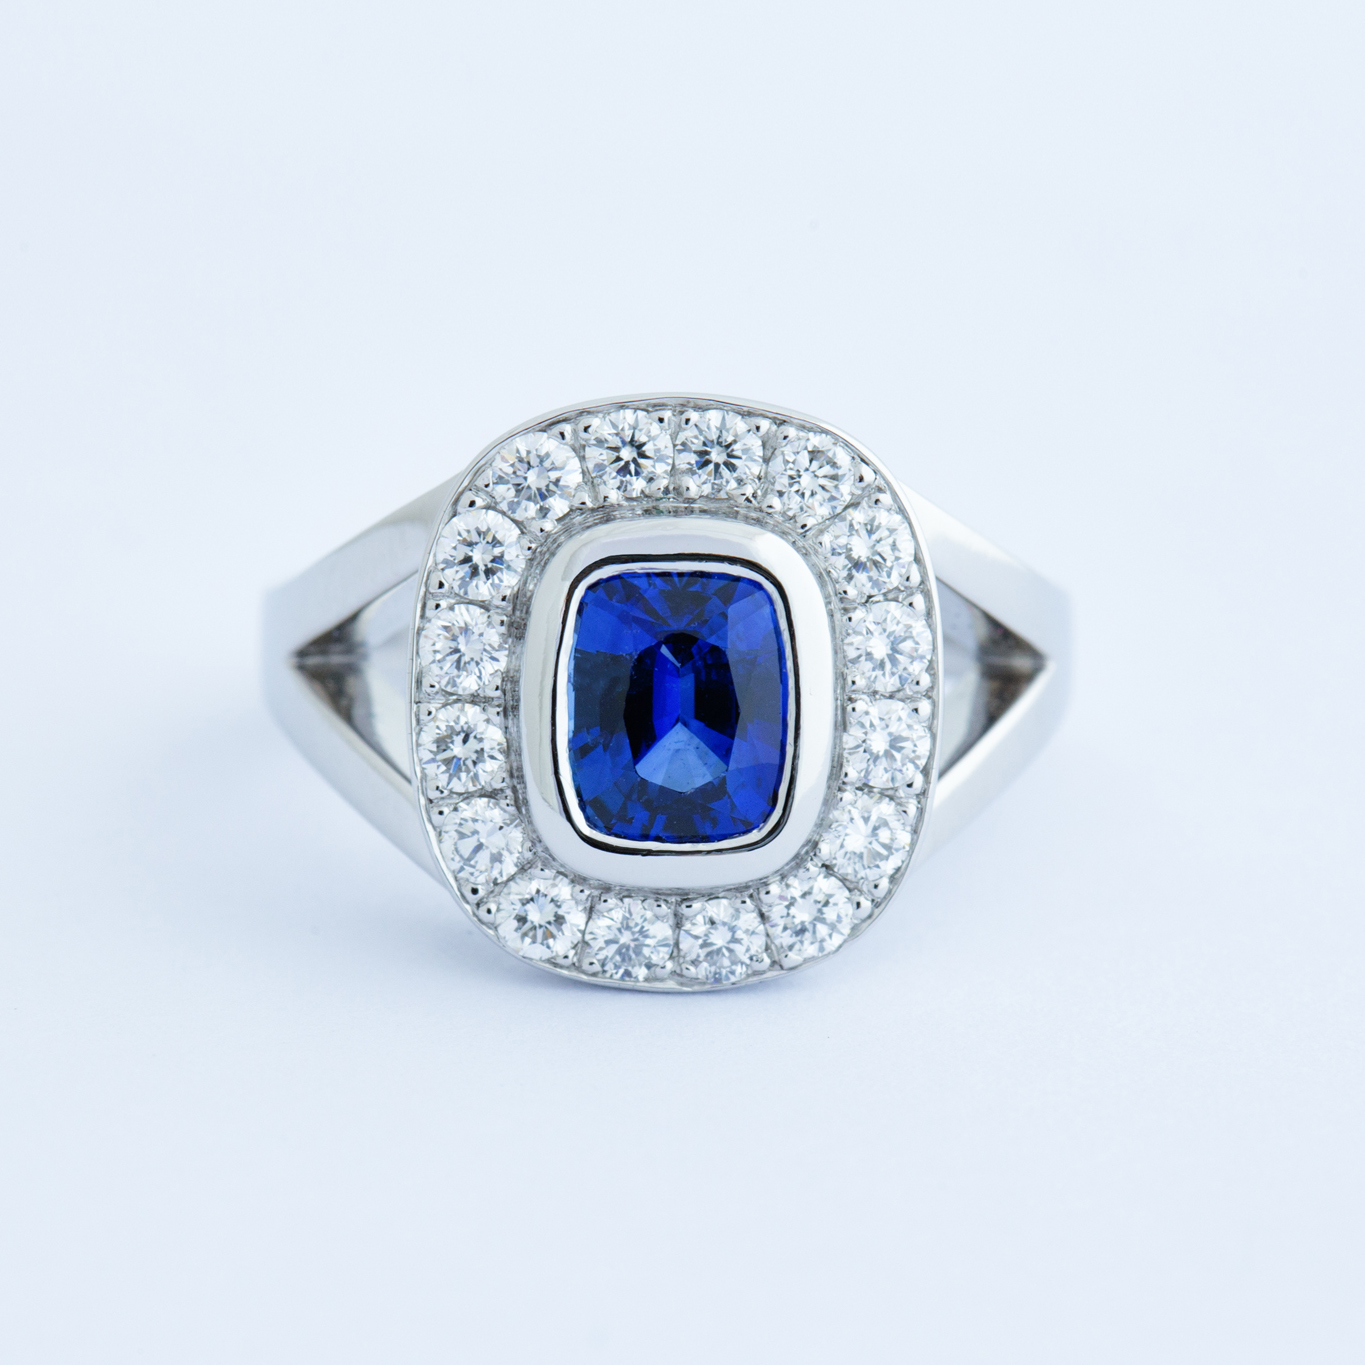 Diamond and Sapphire Engagement Ring in White Gold